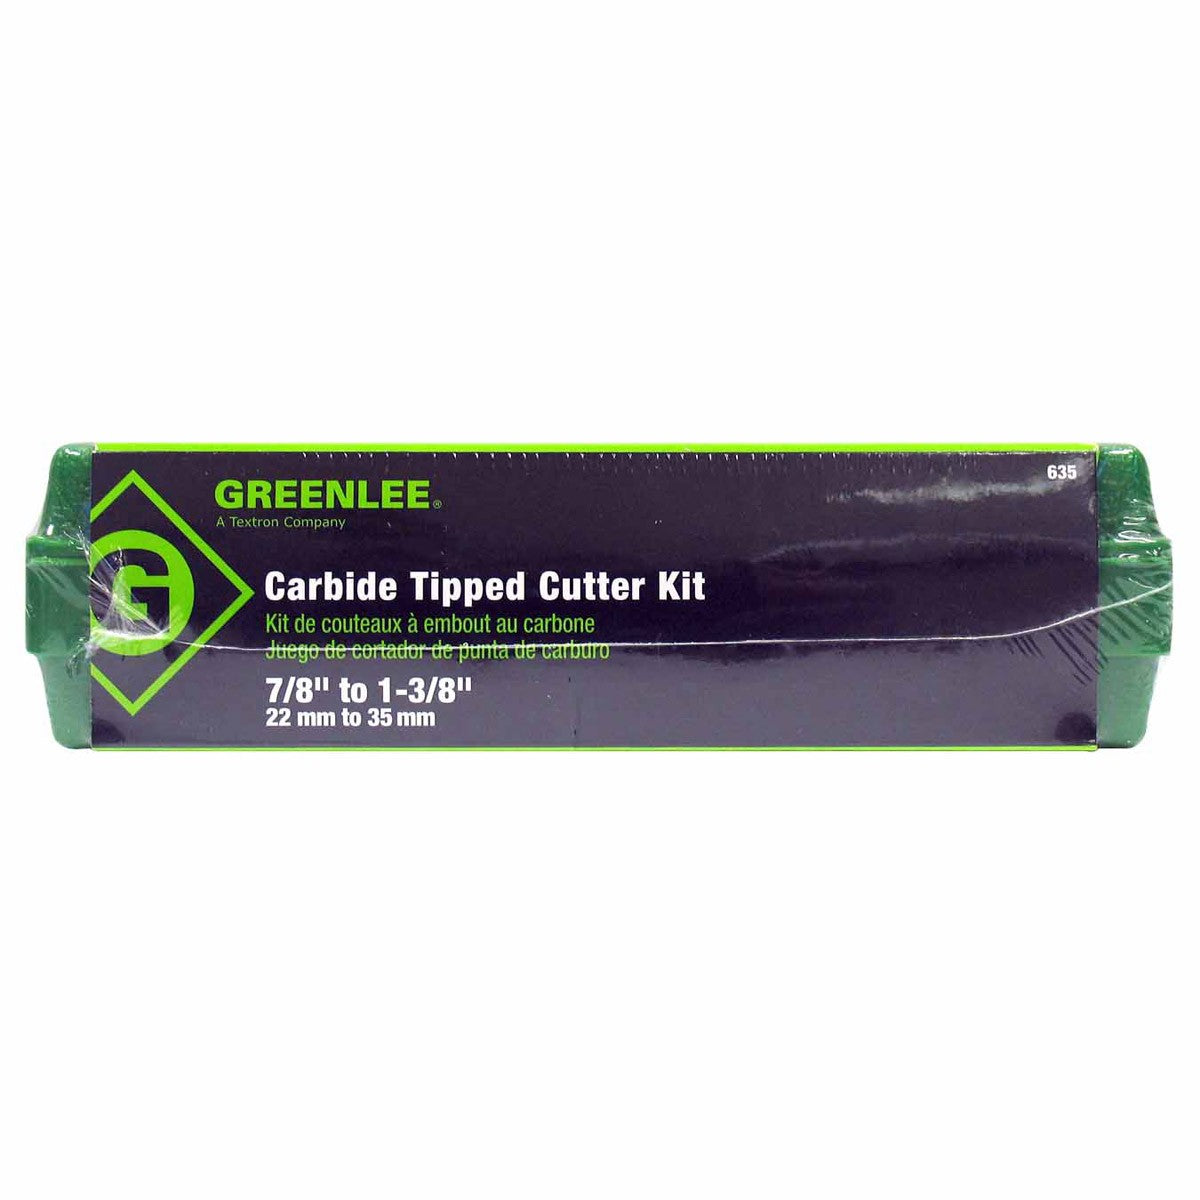 Greenlee 635 Carbide-Tipped Hole Cutter Kit  635